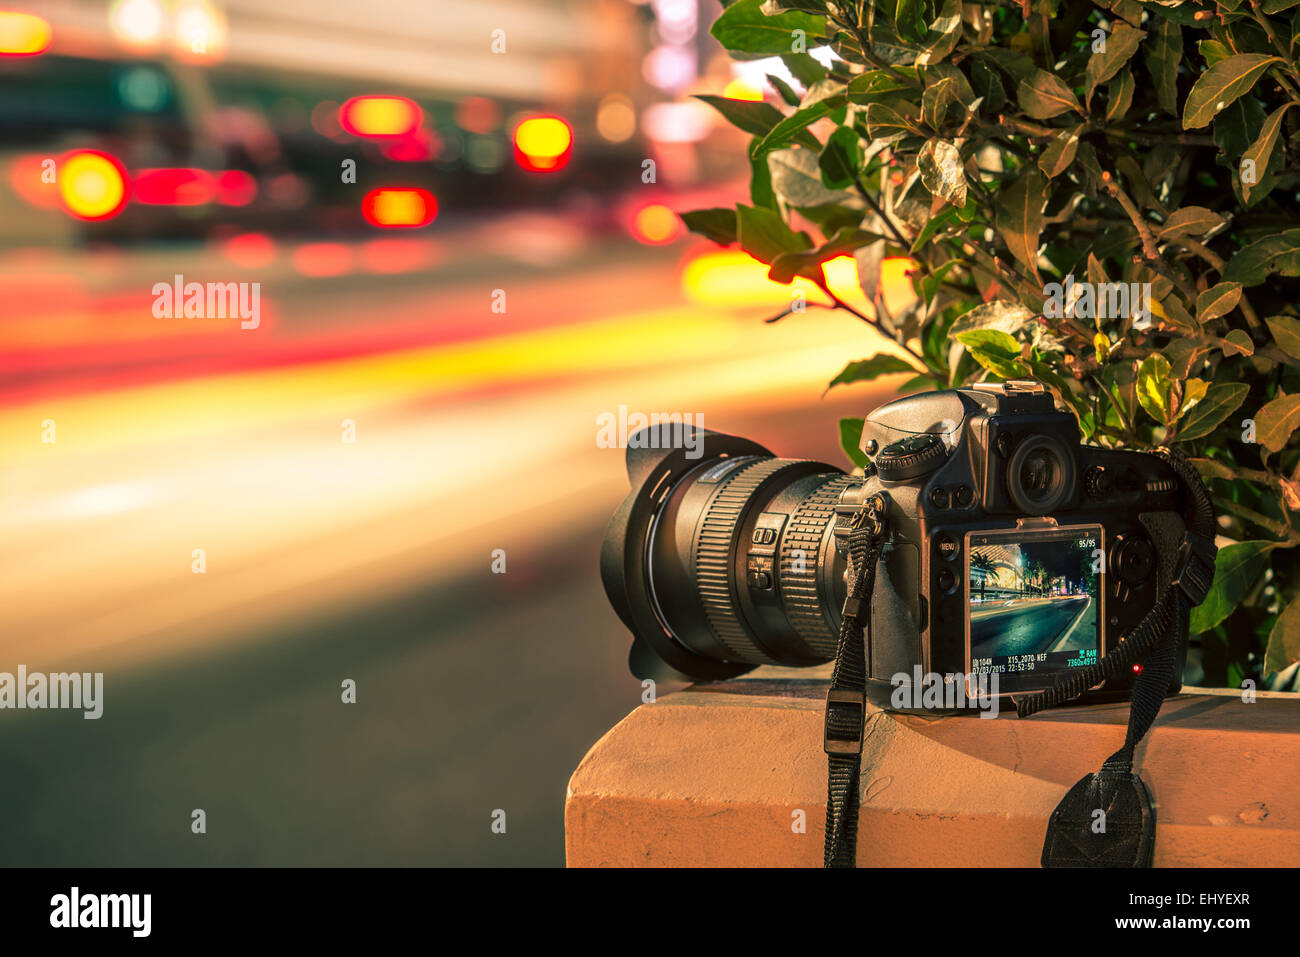 Travel Photography Concept. Professional Digital Camera and Traffic Blurs. Night Long Exposure Photography. Stock Photo